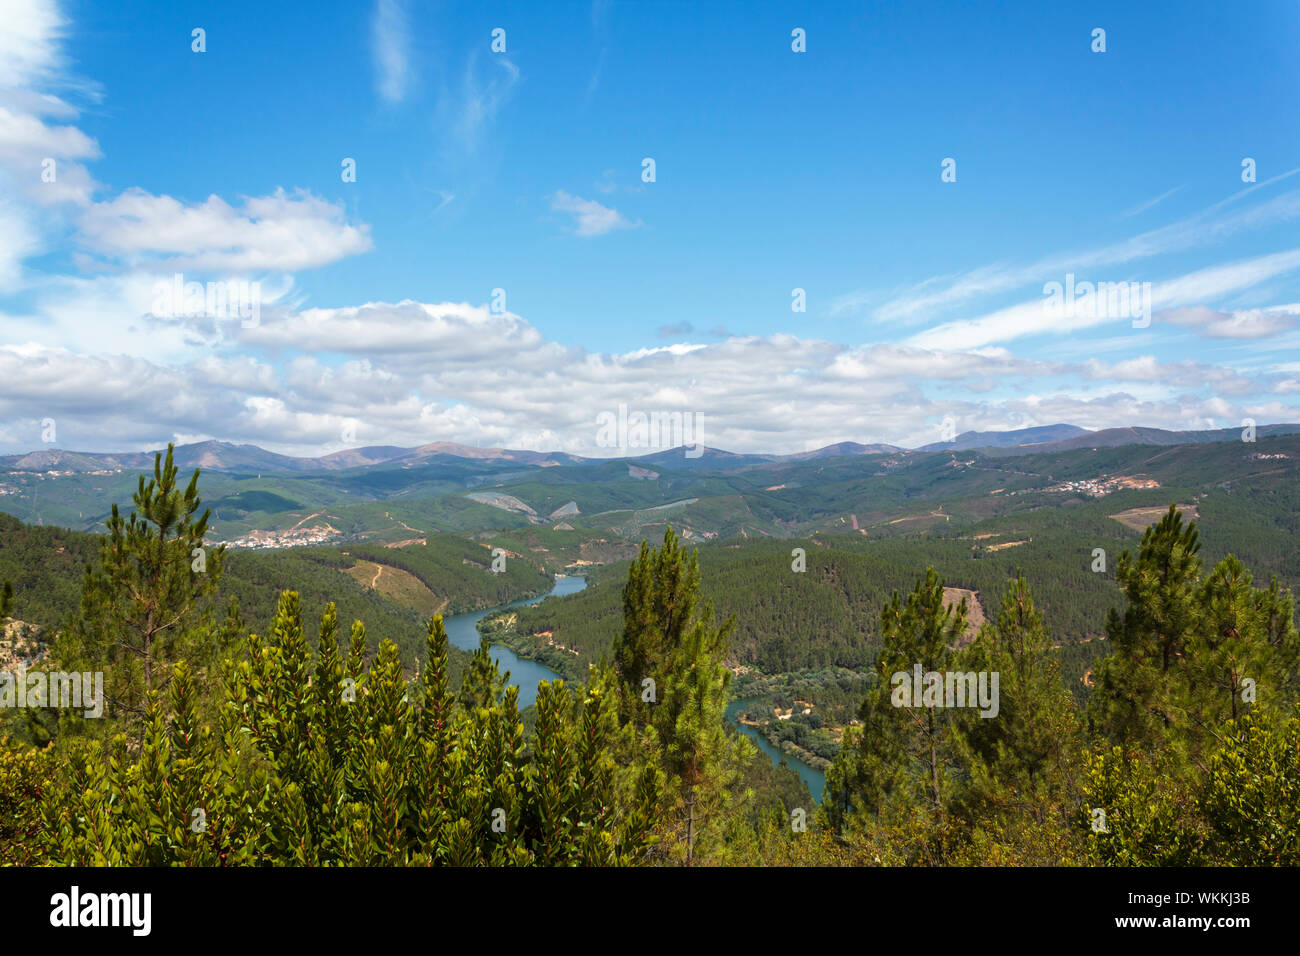 River zigzag and landscape with mountains and pine forest surrounding Stock Photo